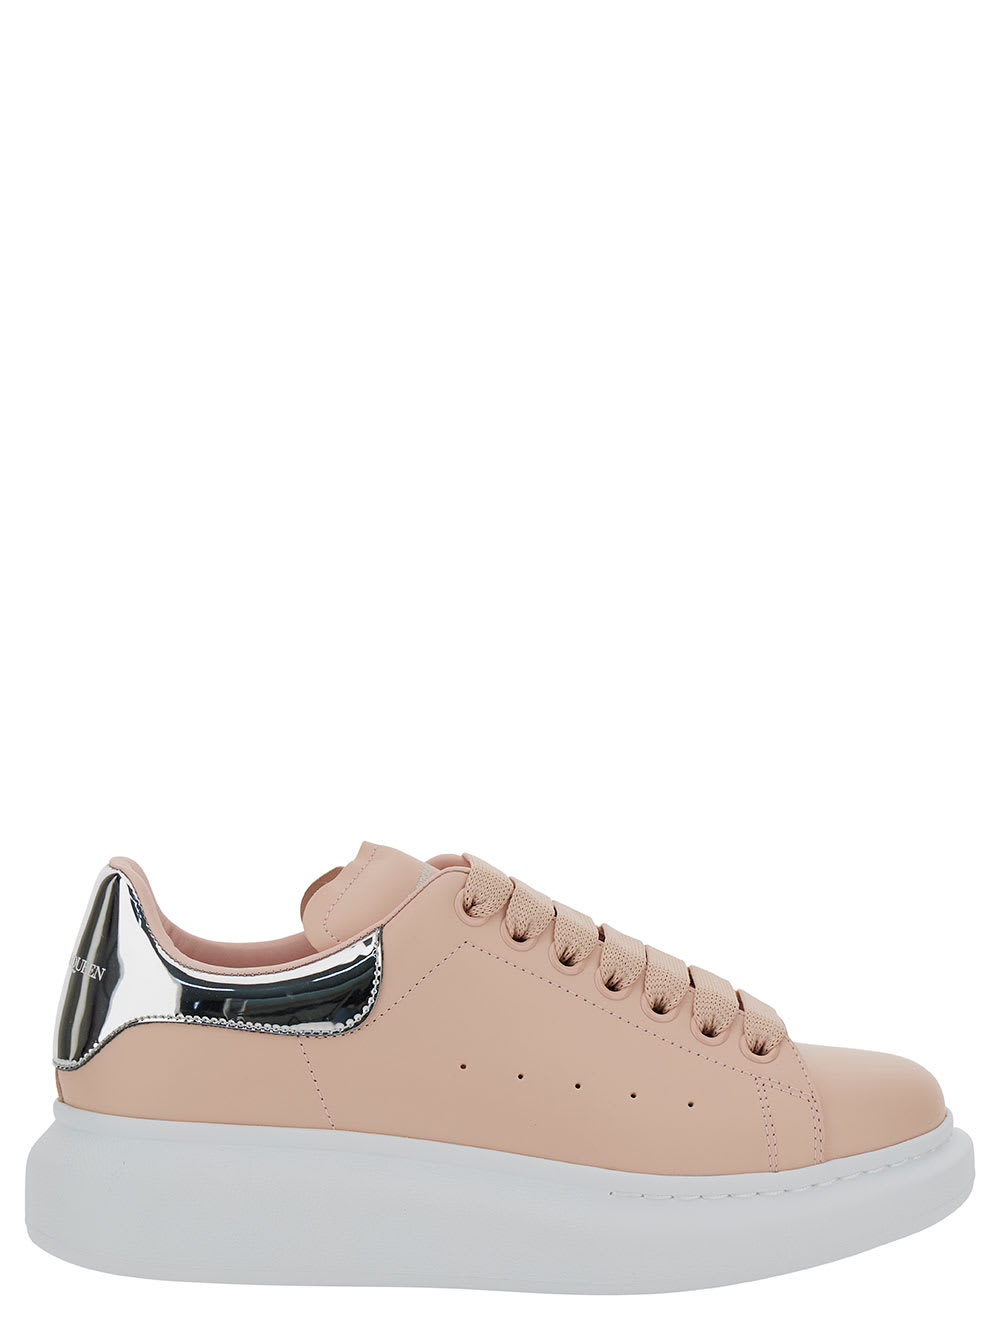 Low Top Sneakers With Oversized Platform And Metallic Heel Tab In Leather